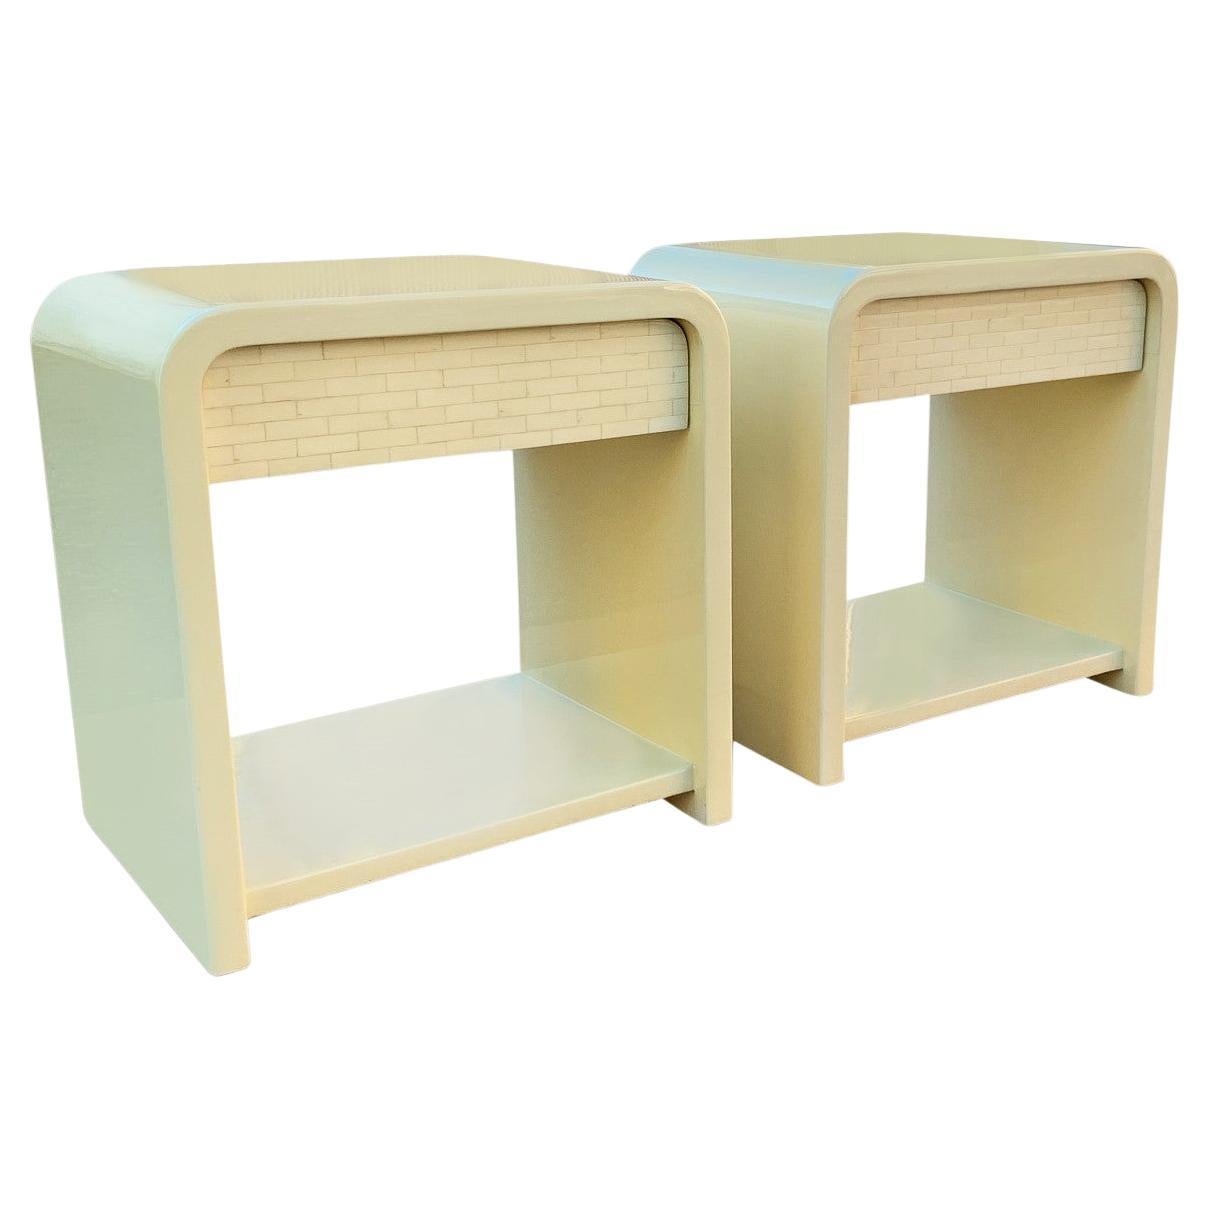 Enrique Garcel Pair Lacquer & Bone Side or End Tables, Night Stands Mid-Century